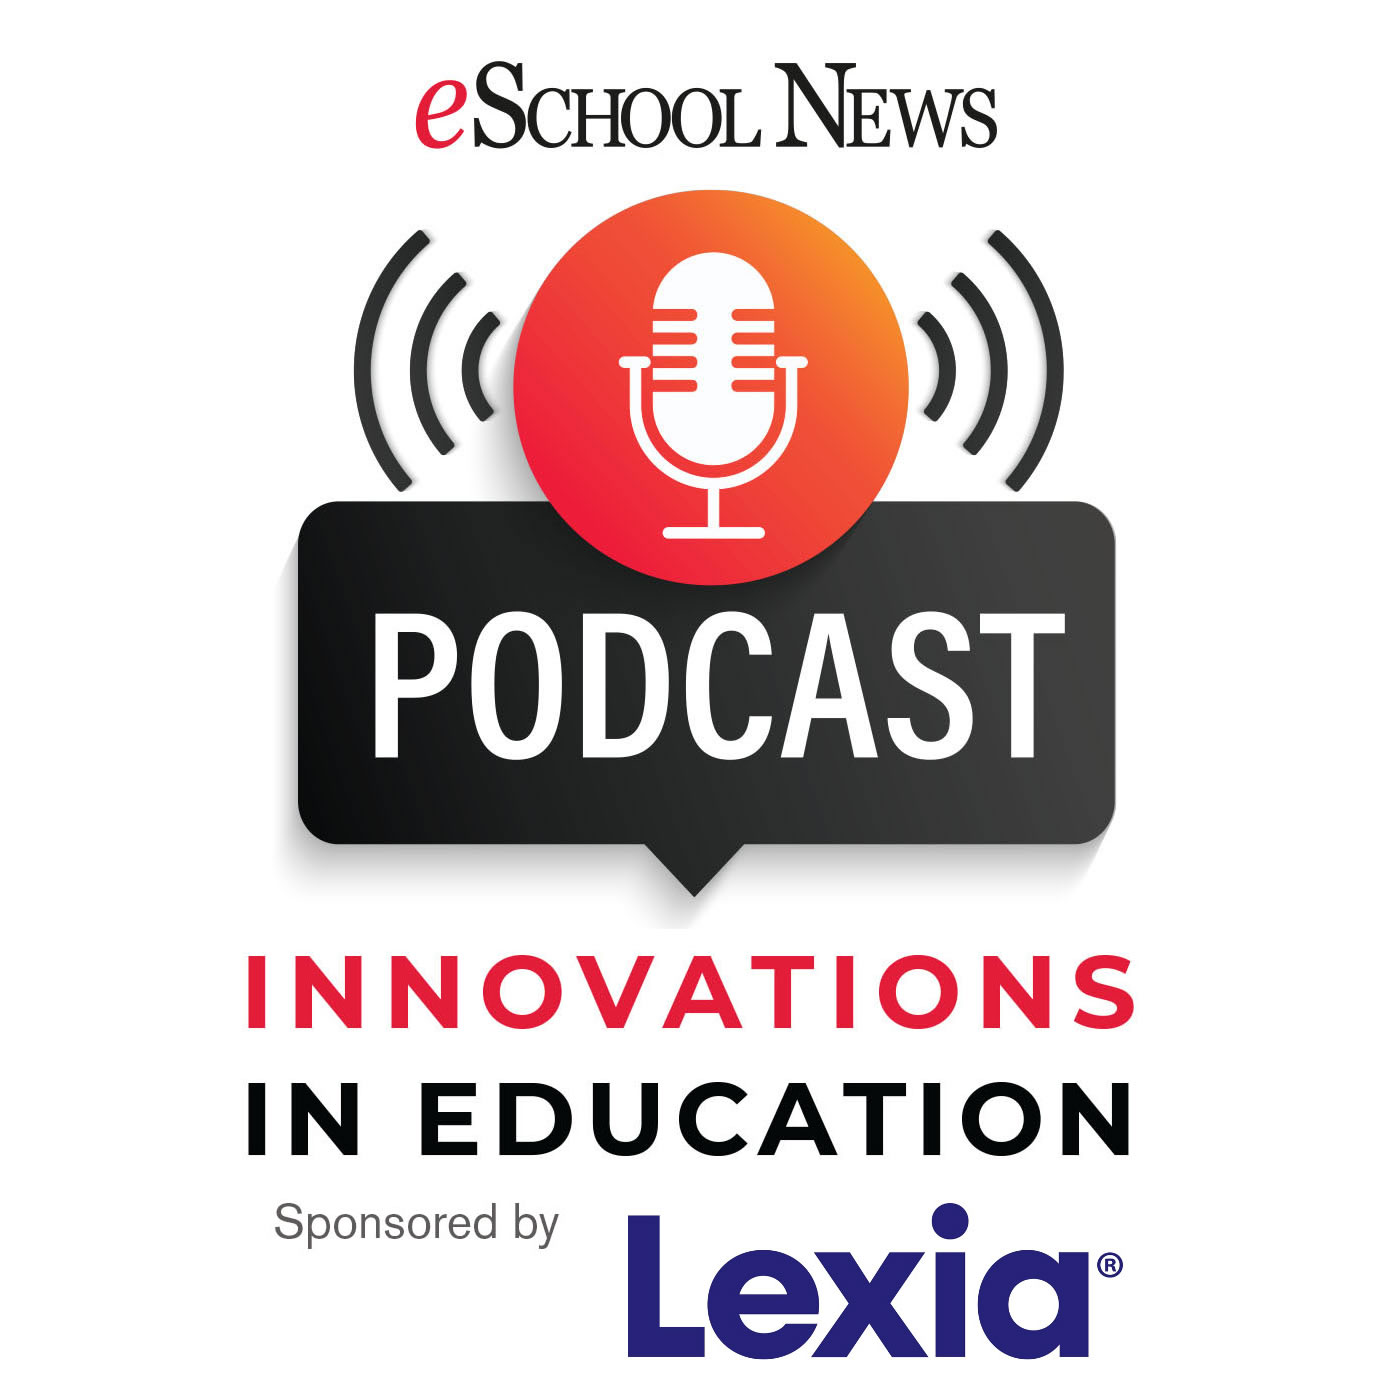 Dyslexia and Instructional Equity: A Conversation for School Administrators